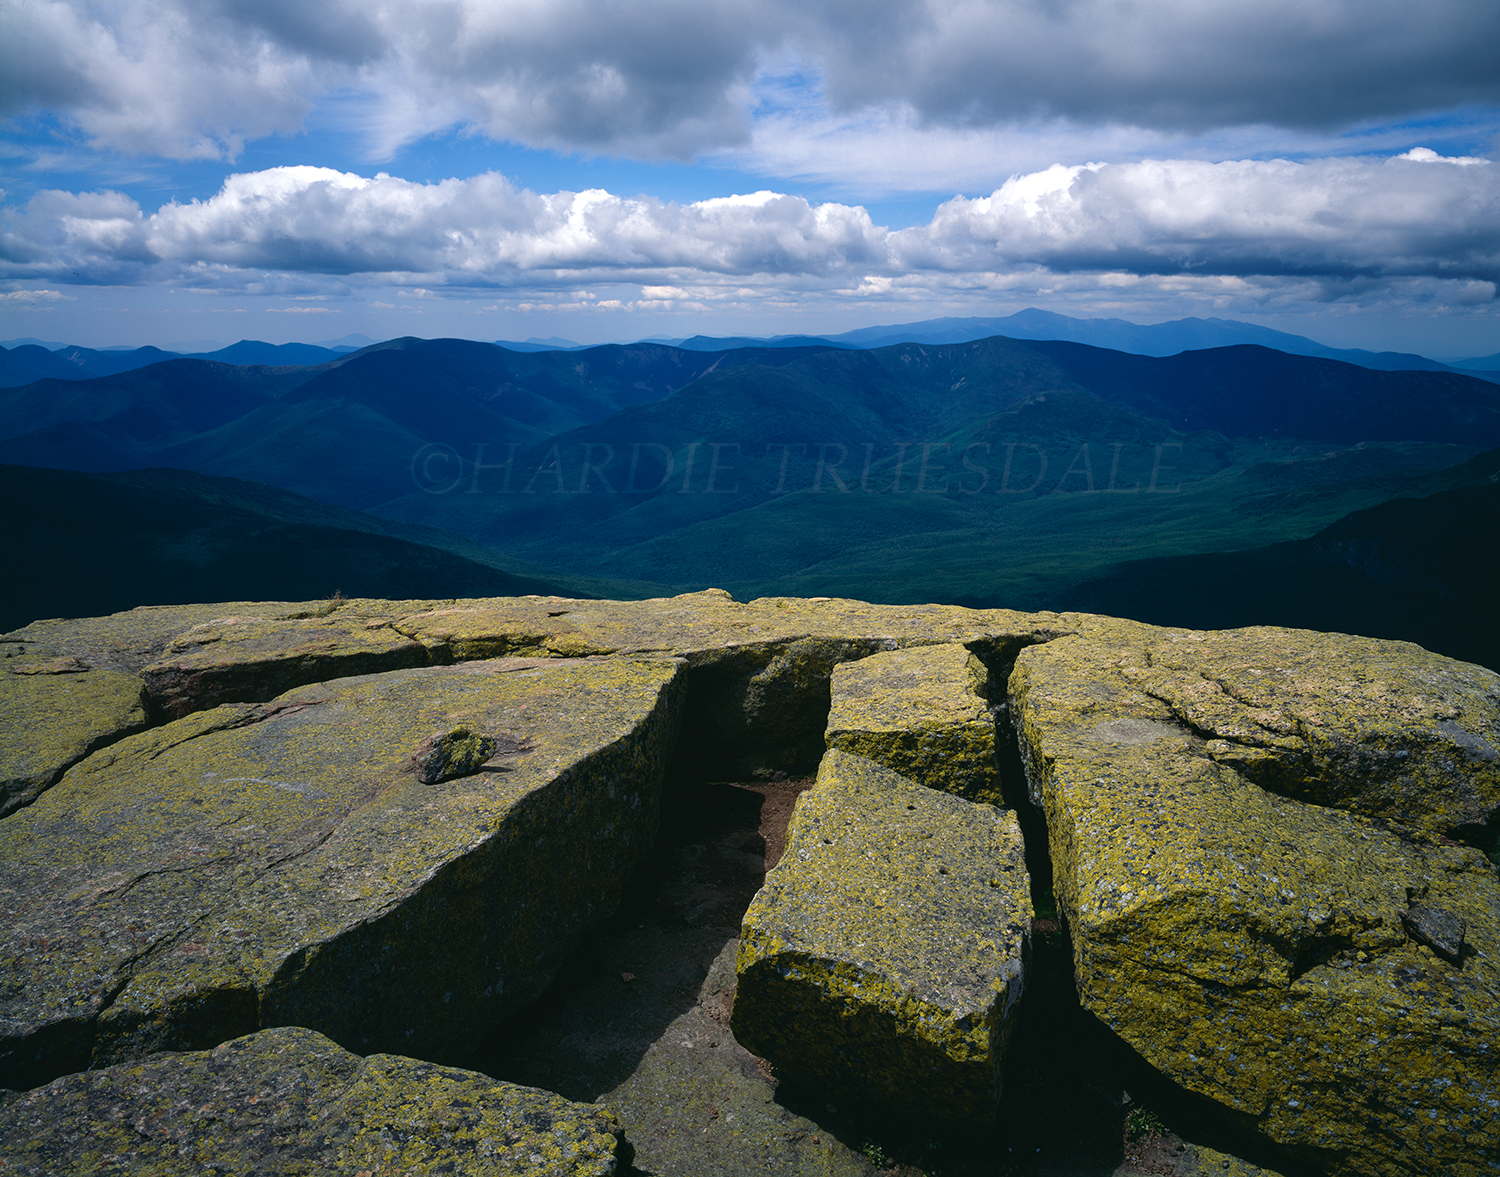 NH#39 "Presidential Range from Lafayette Summit"